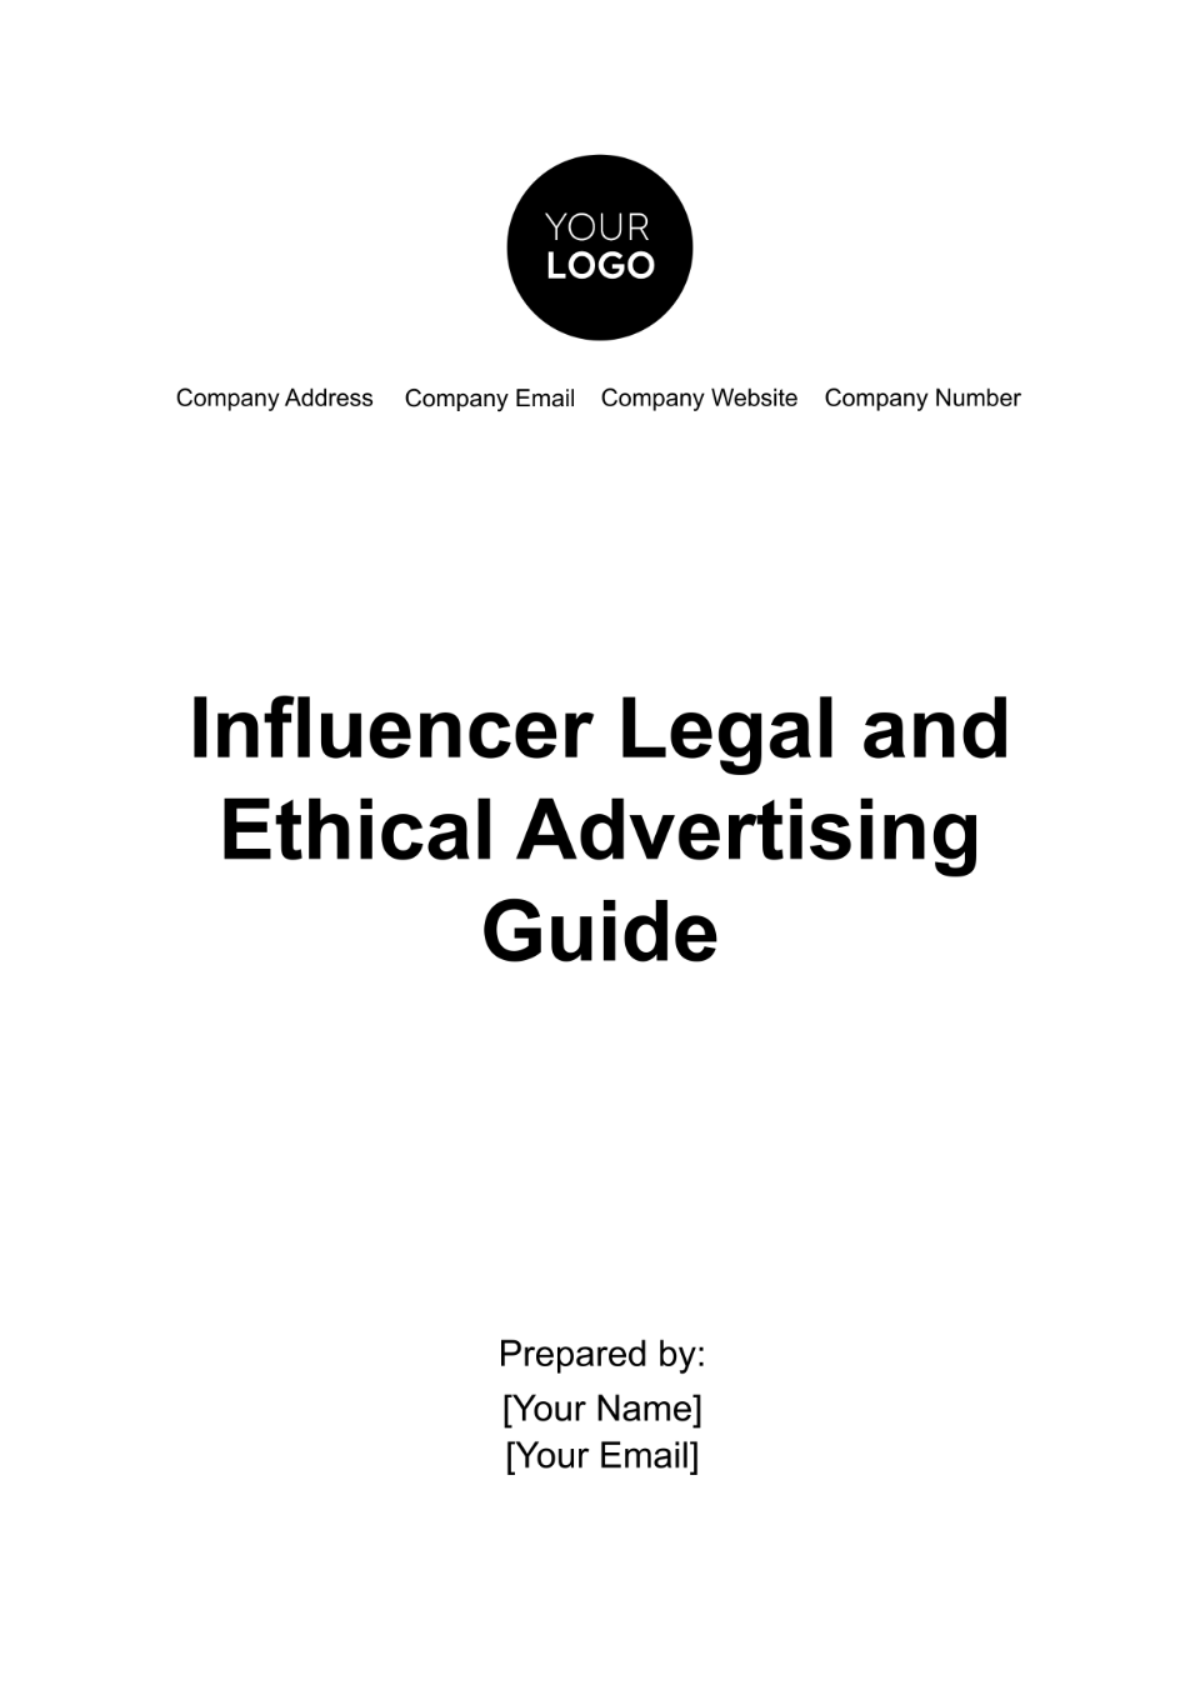 Free Influencer Legal and Ethical Advertising Guide Template